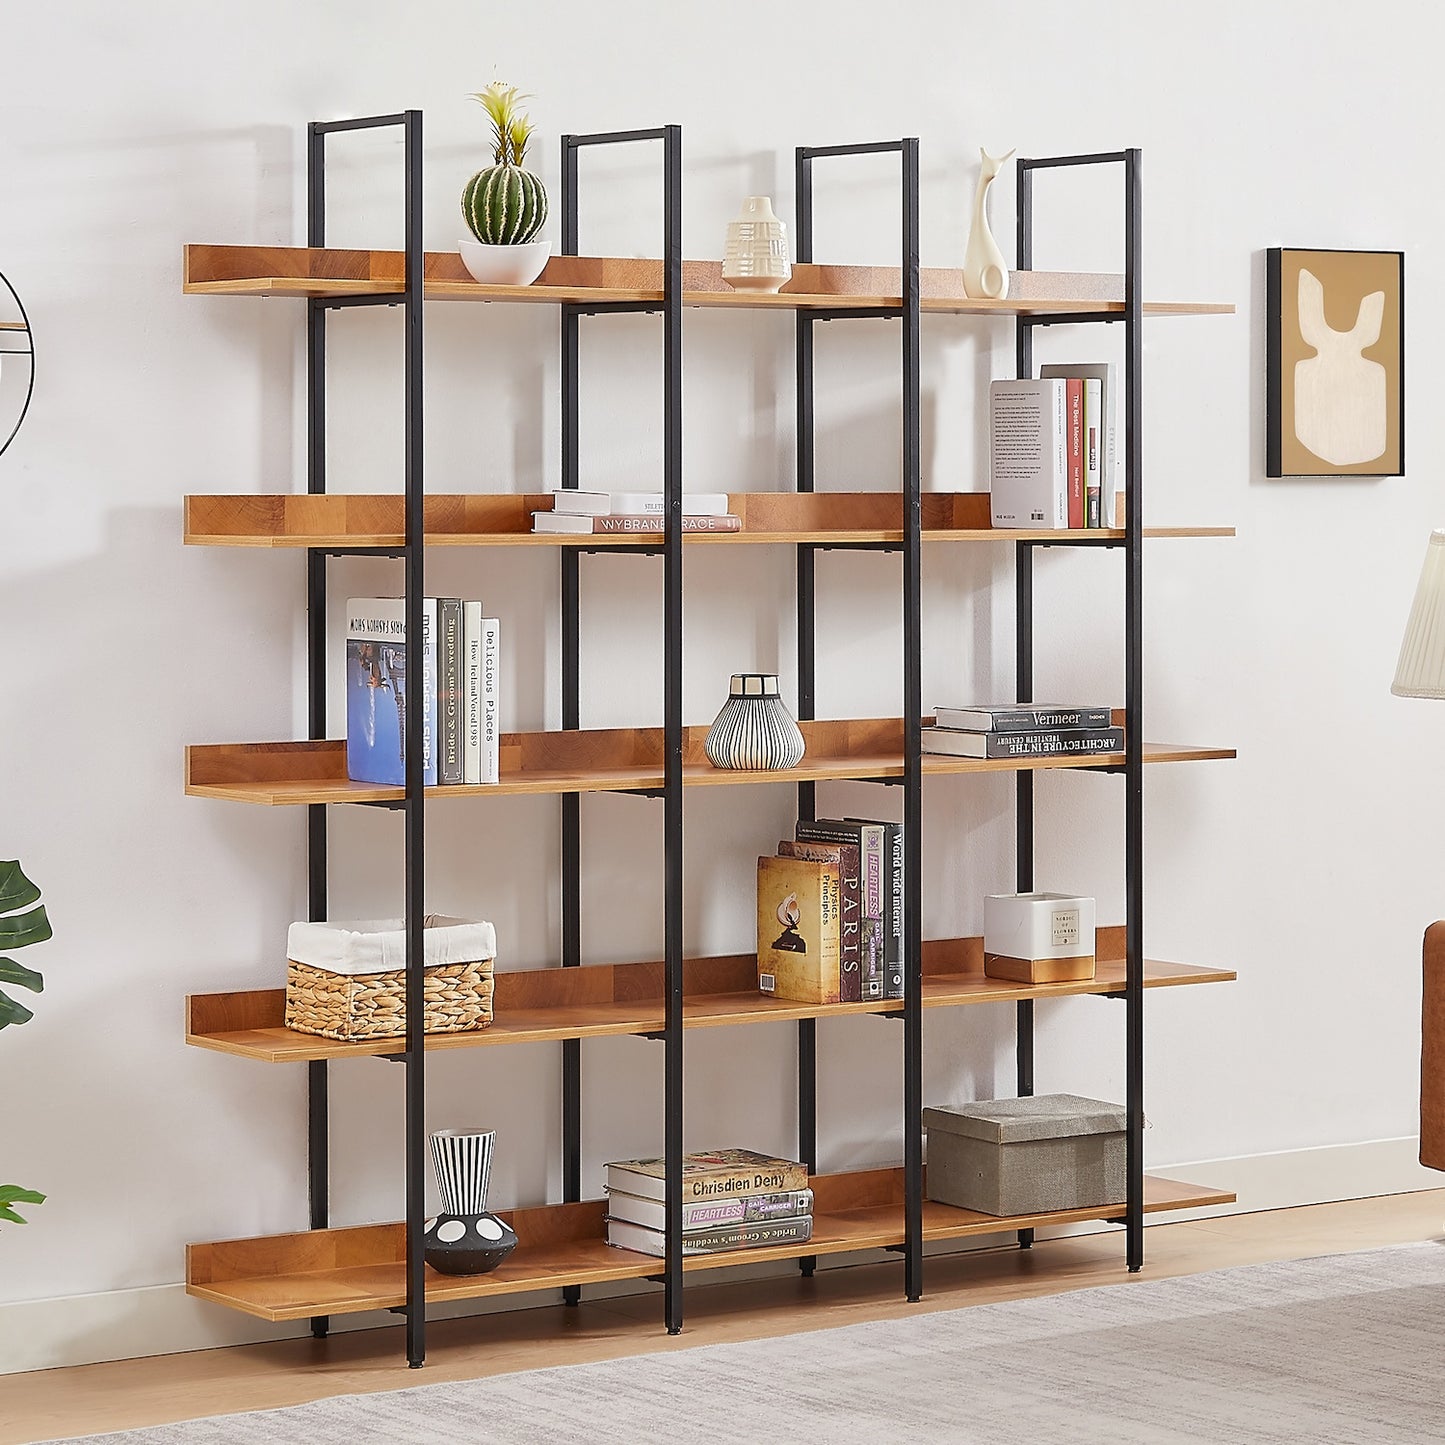 BY Vintage Industrial Style 5-Tier Bookcase - Black & Brown